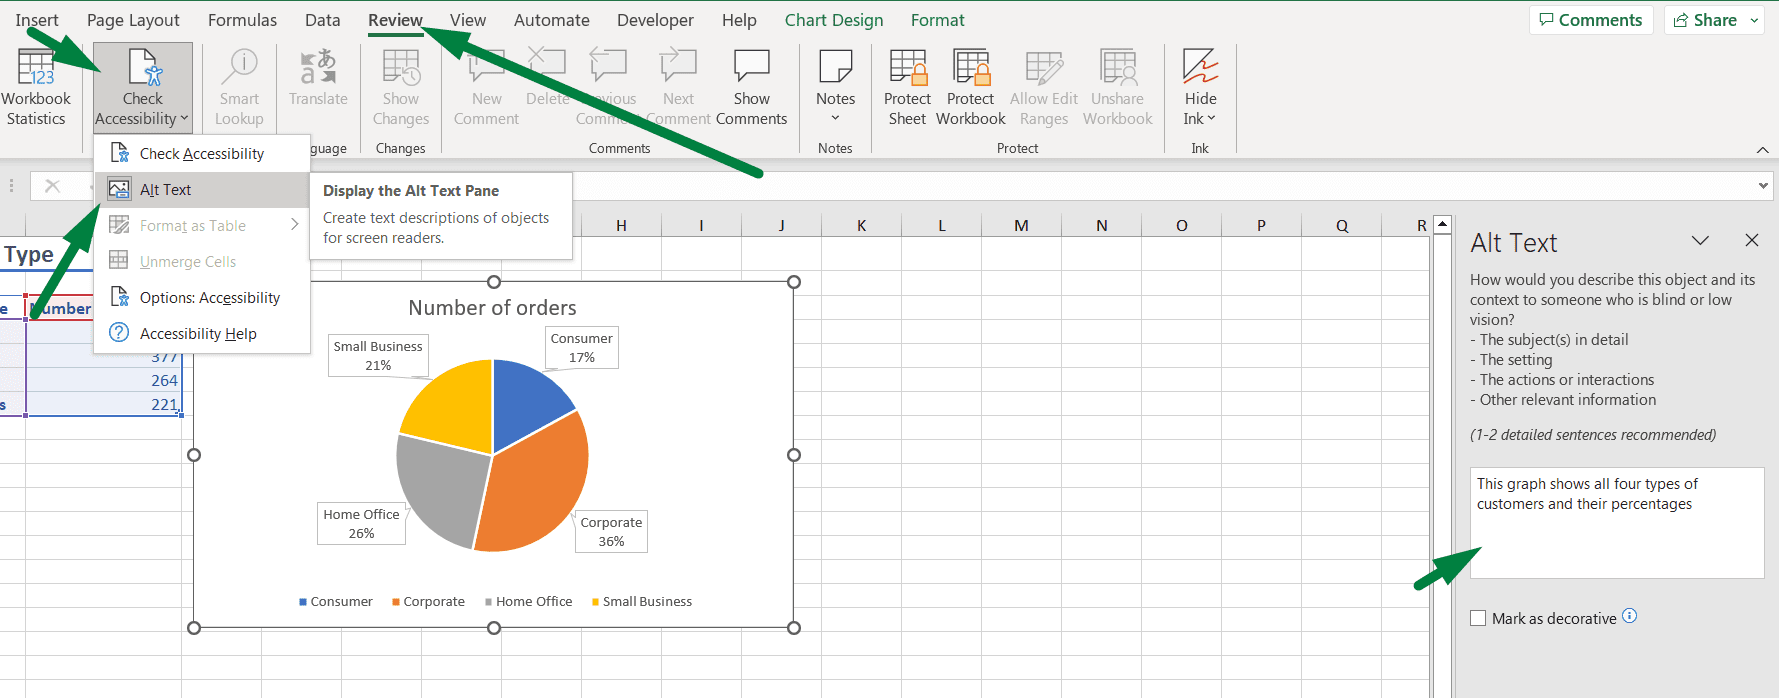 How to Add Alternative Text to a Chart in Excel